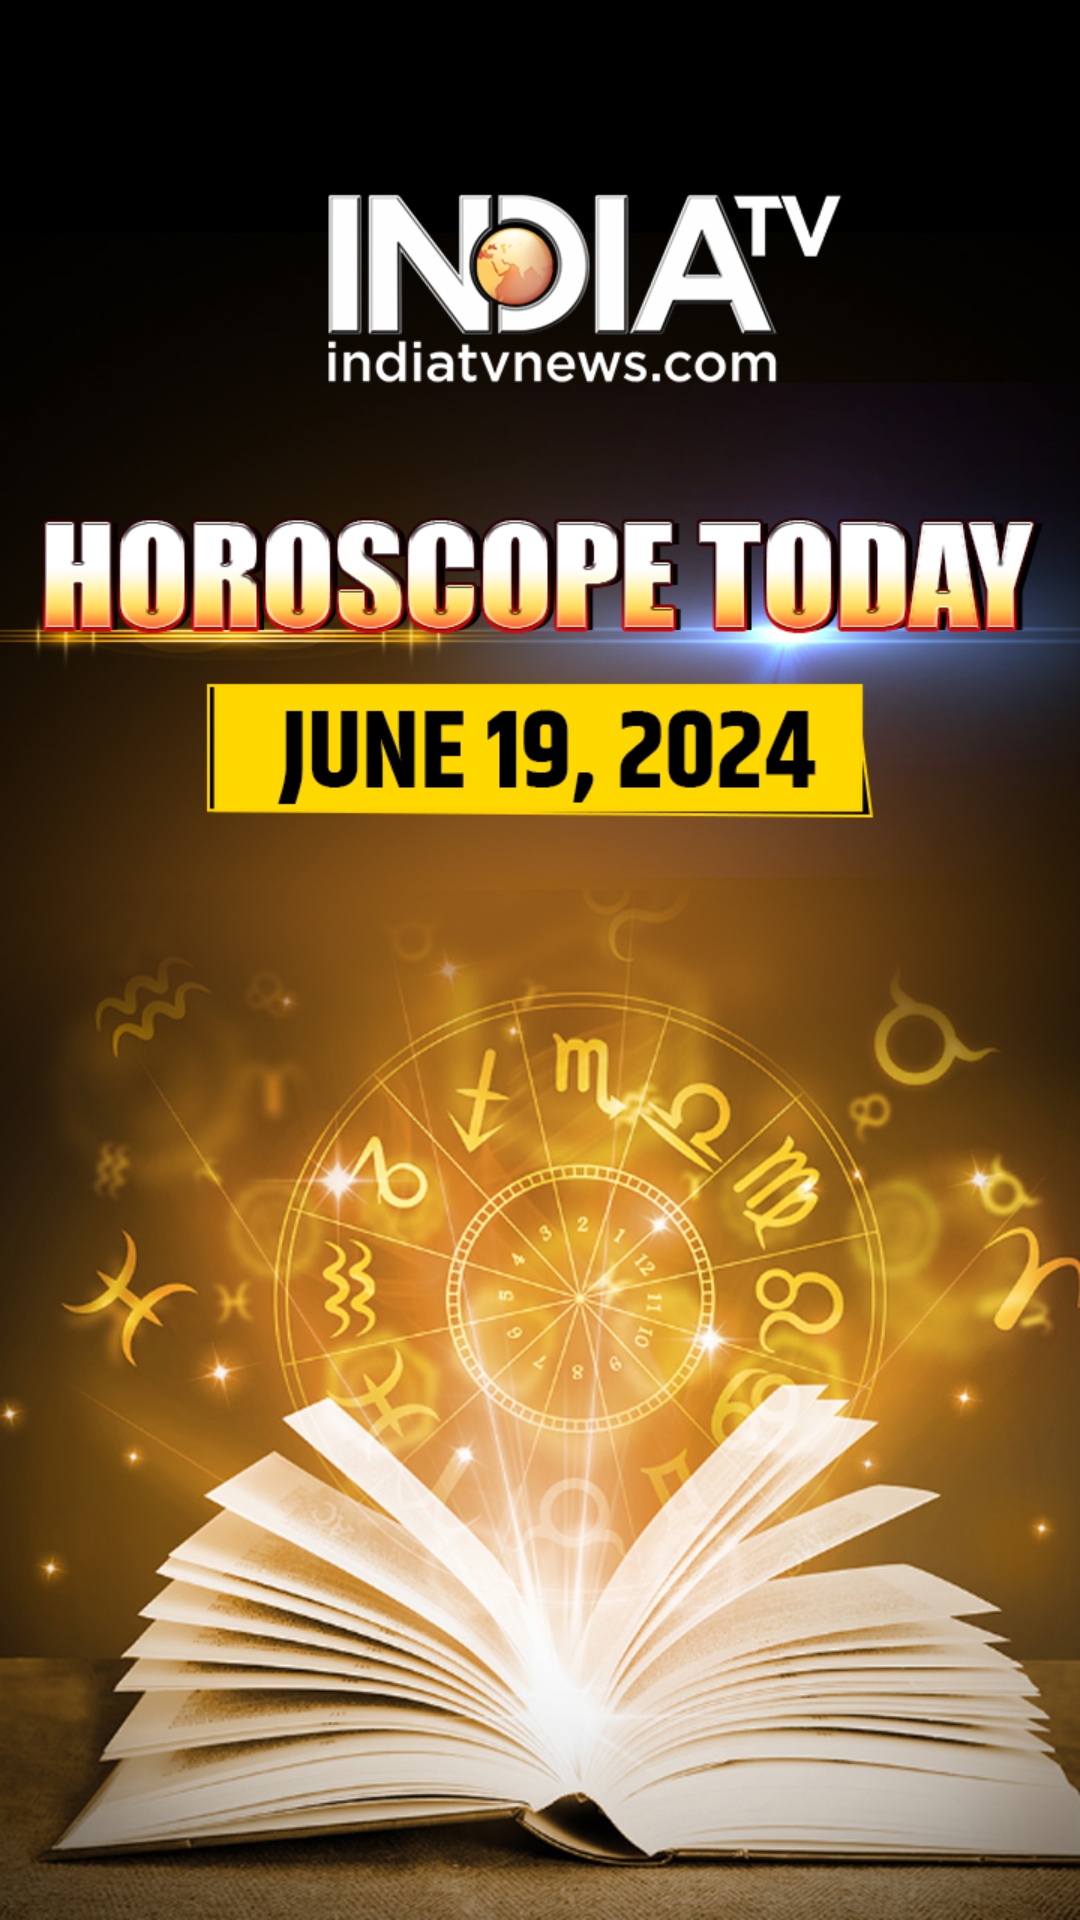 Know Lucky number and colour for all zodiac signs in your horoscope for June 19, 2024